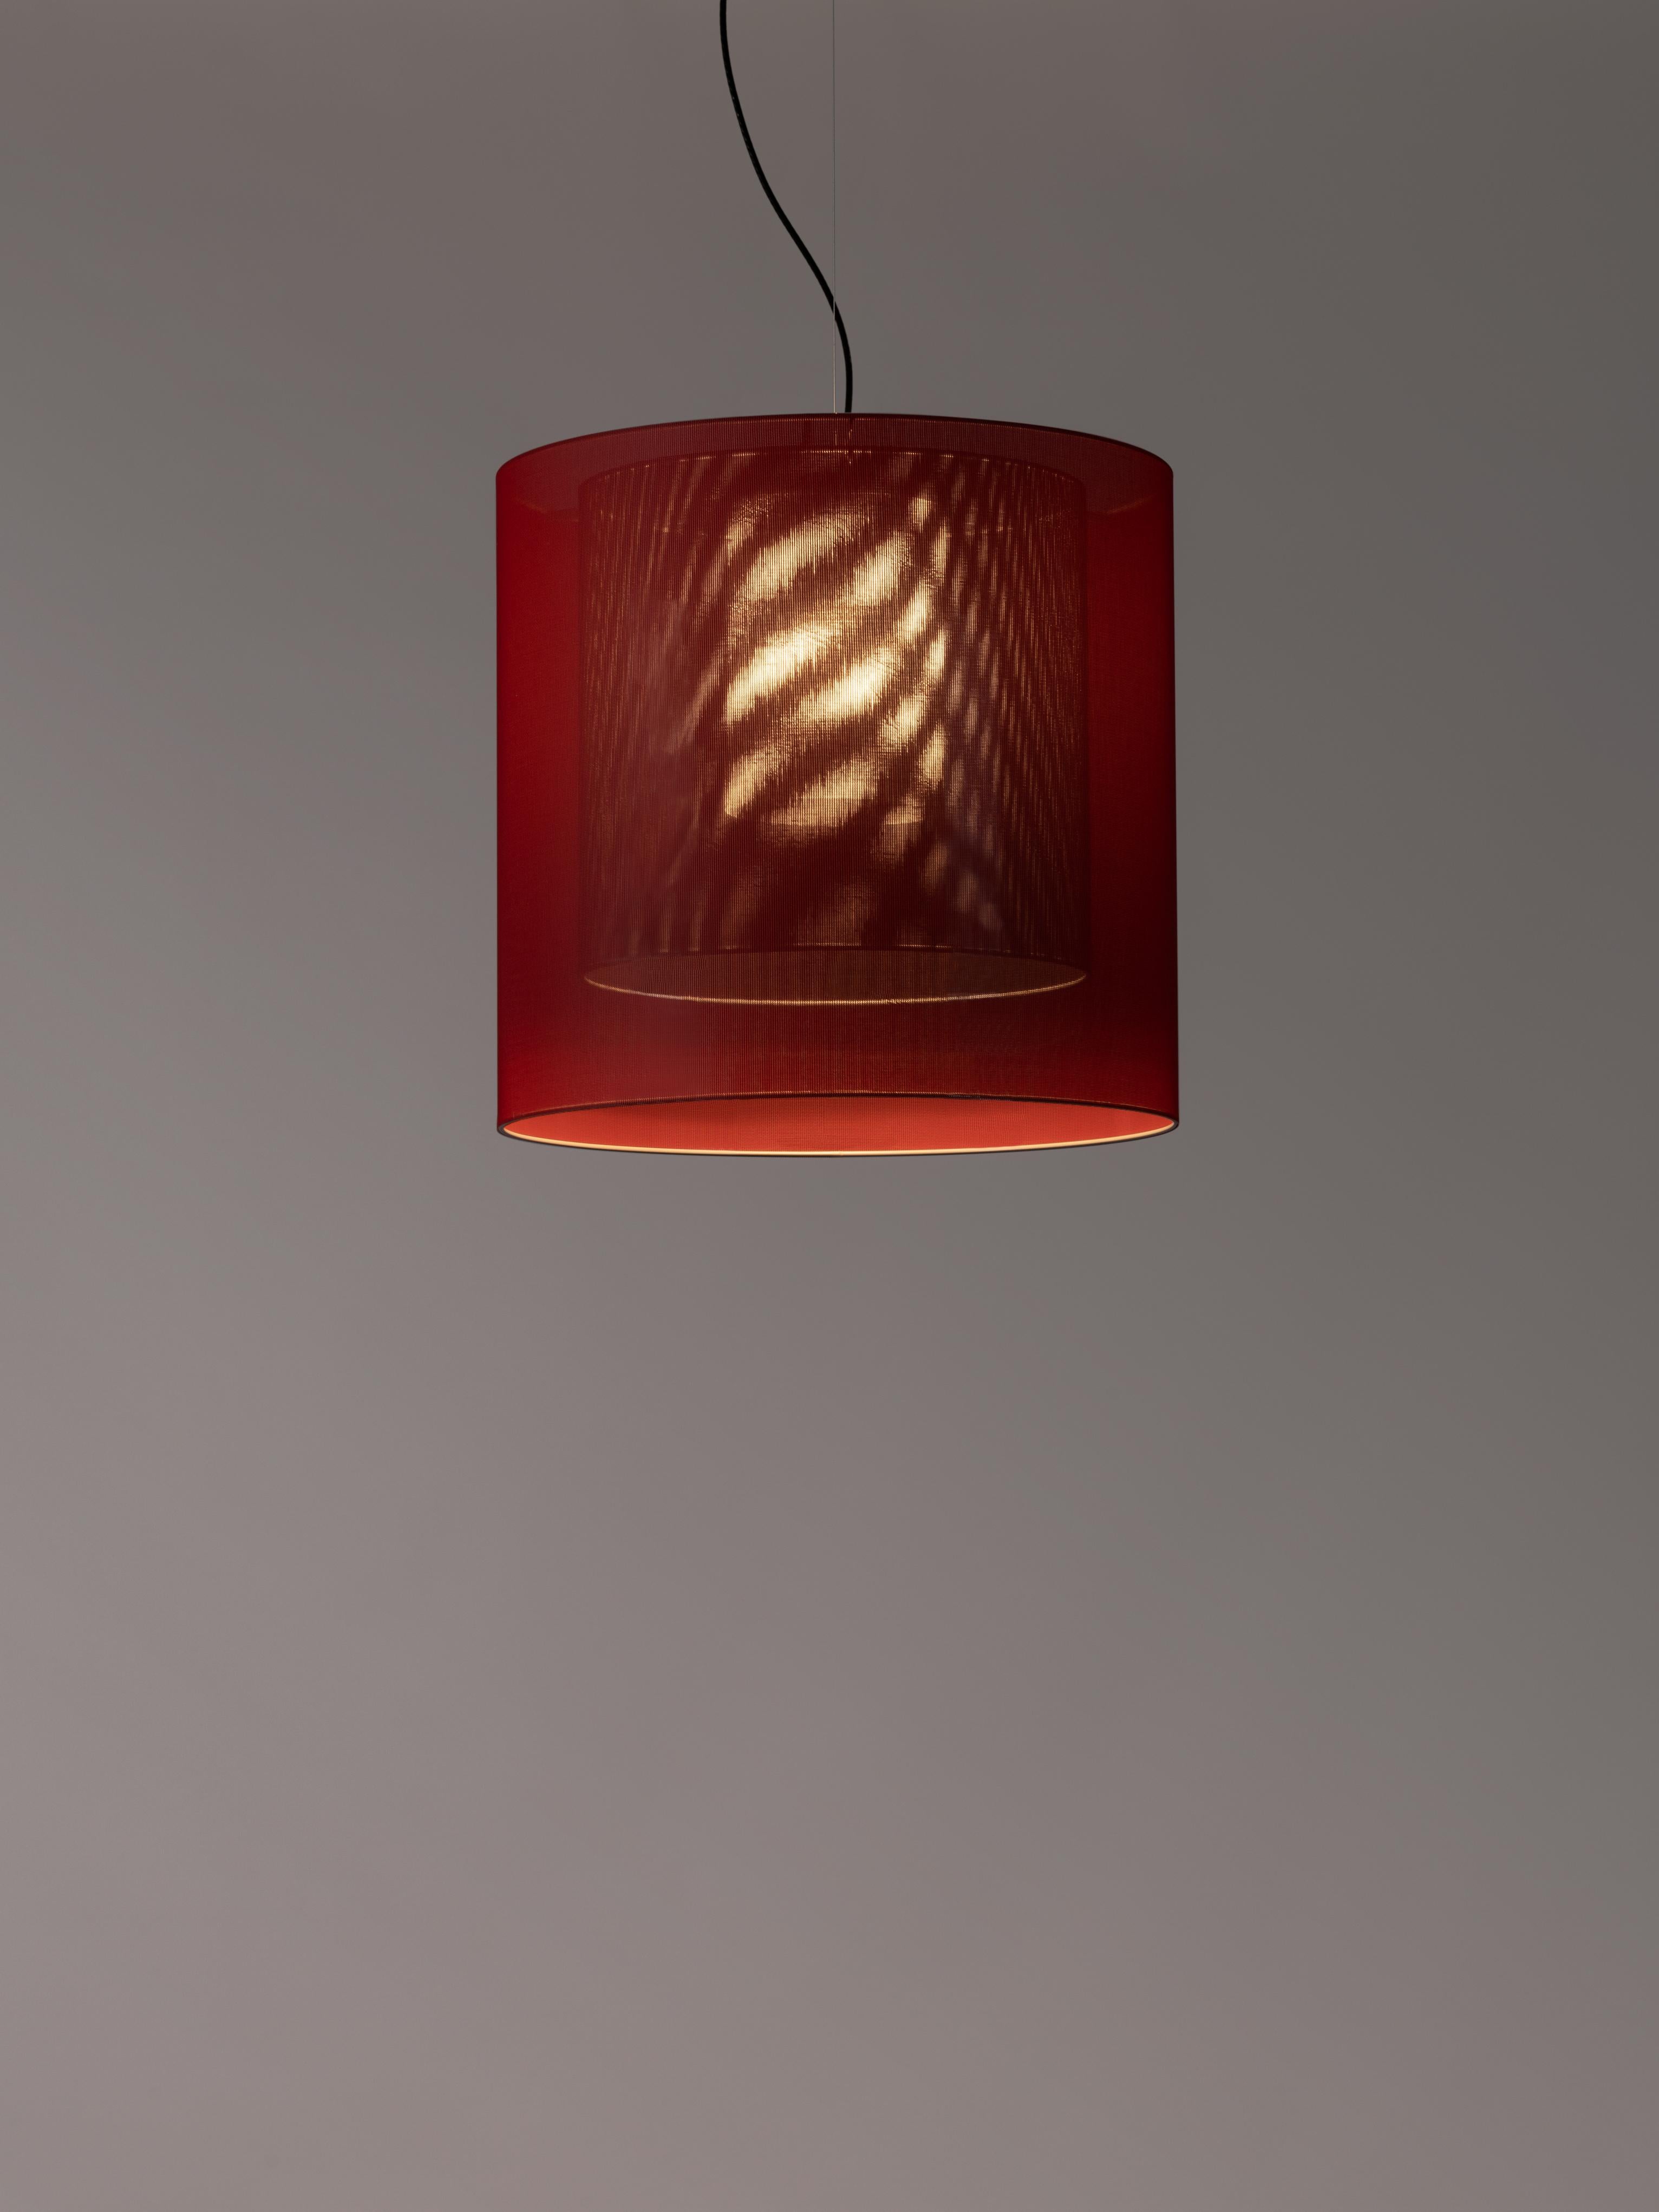 Red and black moaré LM pendant lamp by Antoni Arola
Dimensions: D 62 x H 60 cm
Materials: Metal, polyester.
Available in other colors and sizes.

Moaré’s multiple combinations of formats and colours make it highly versatile. The series takes